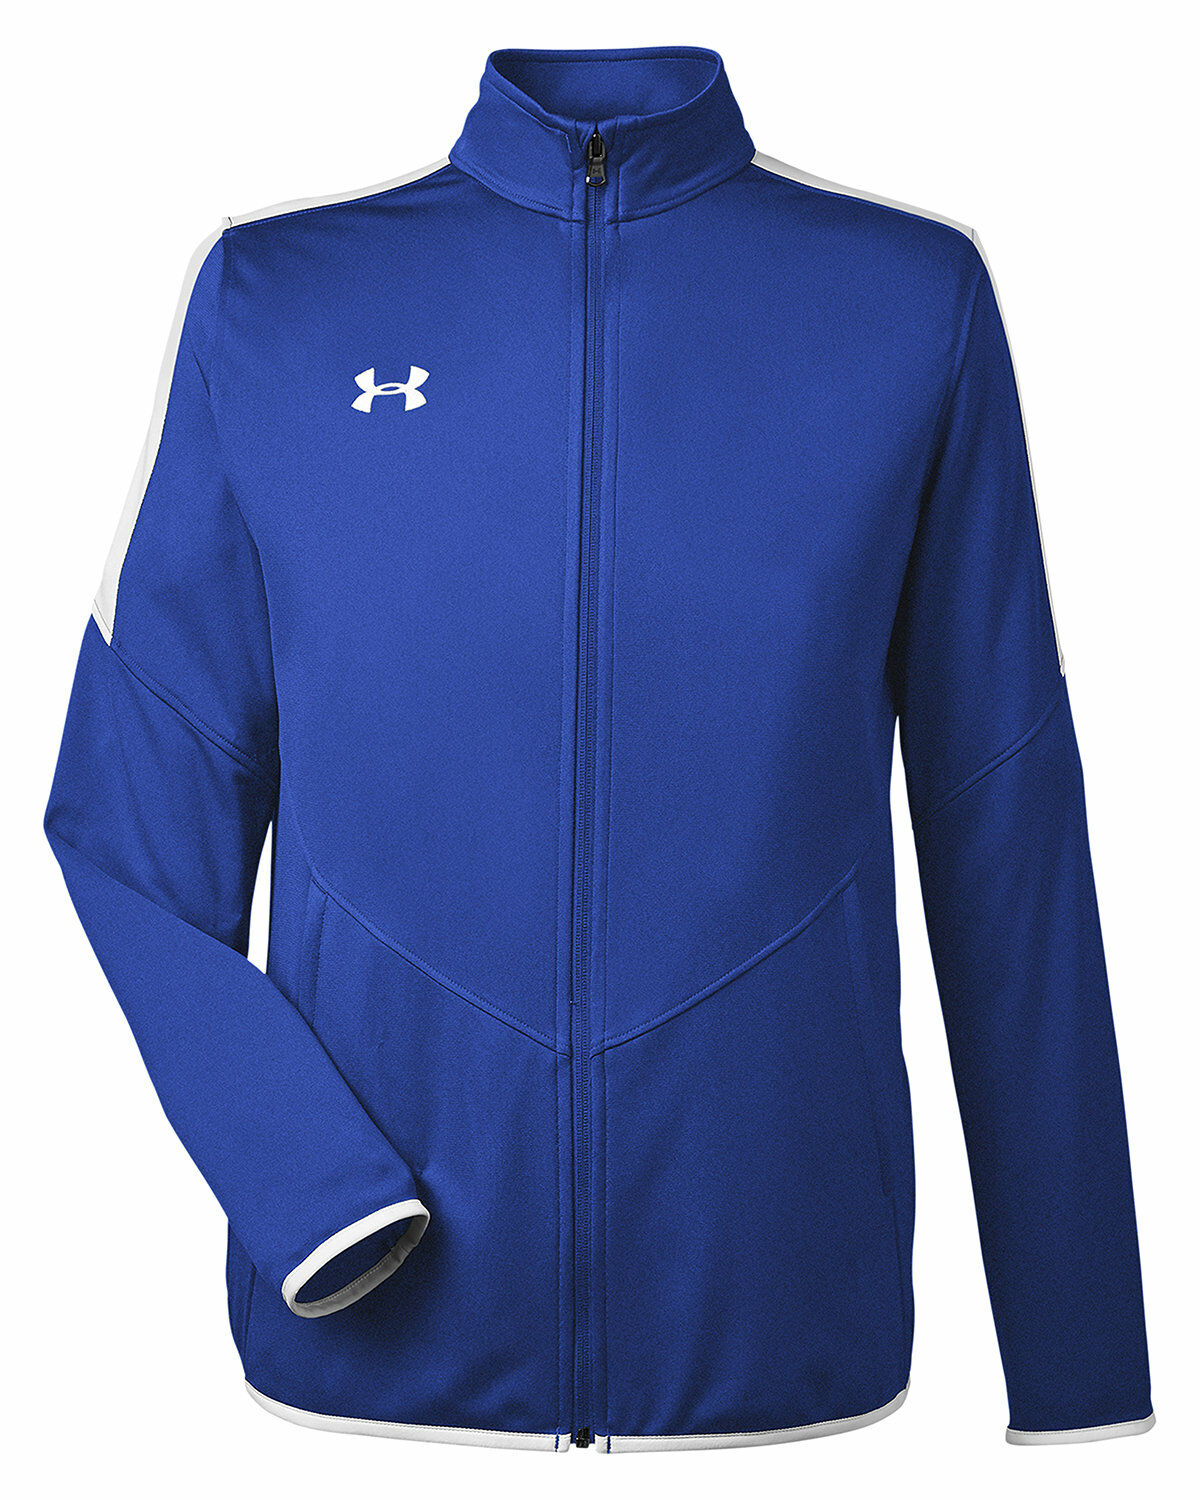 Branded Under Armour Men’s Rival Knit Jacket Royal